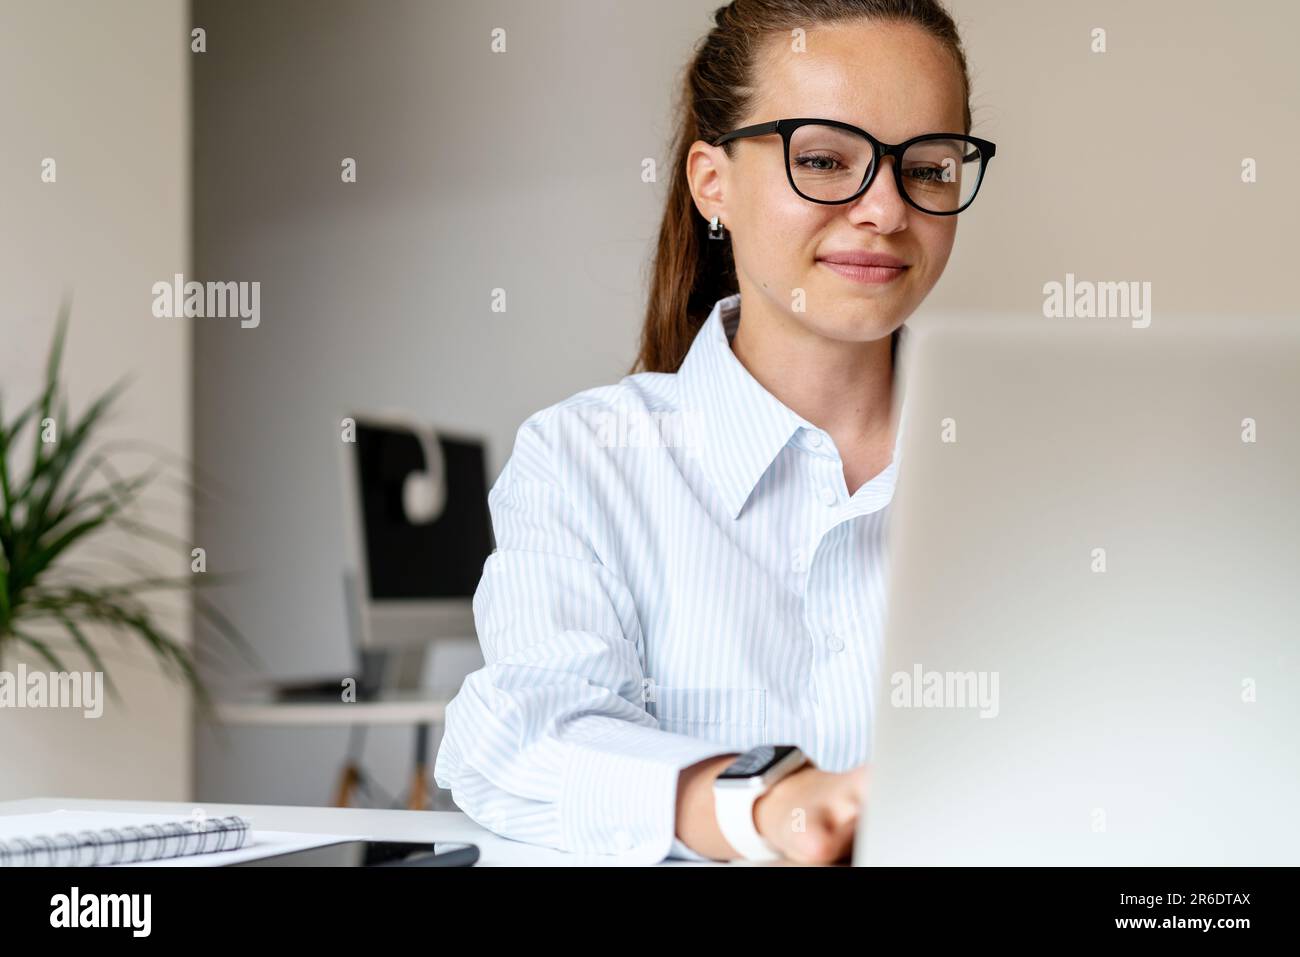 Young brunette businesswoman in glasses smiling and working on a laptop in the office Stock Photo